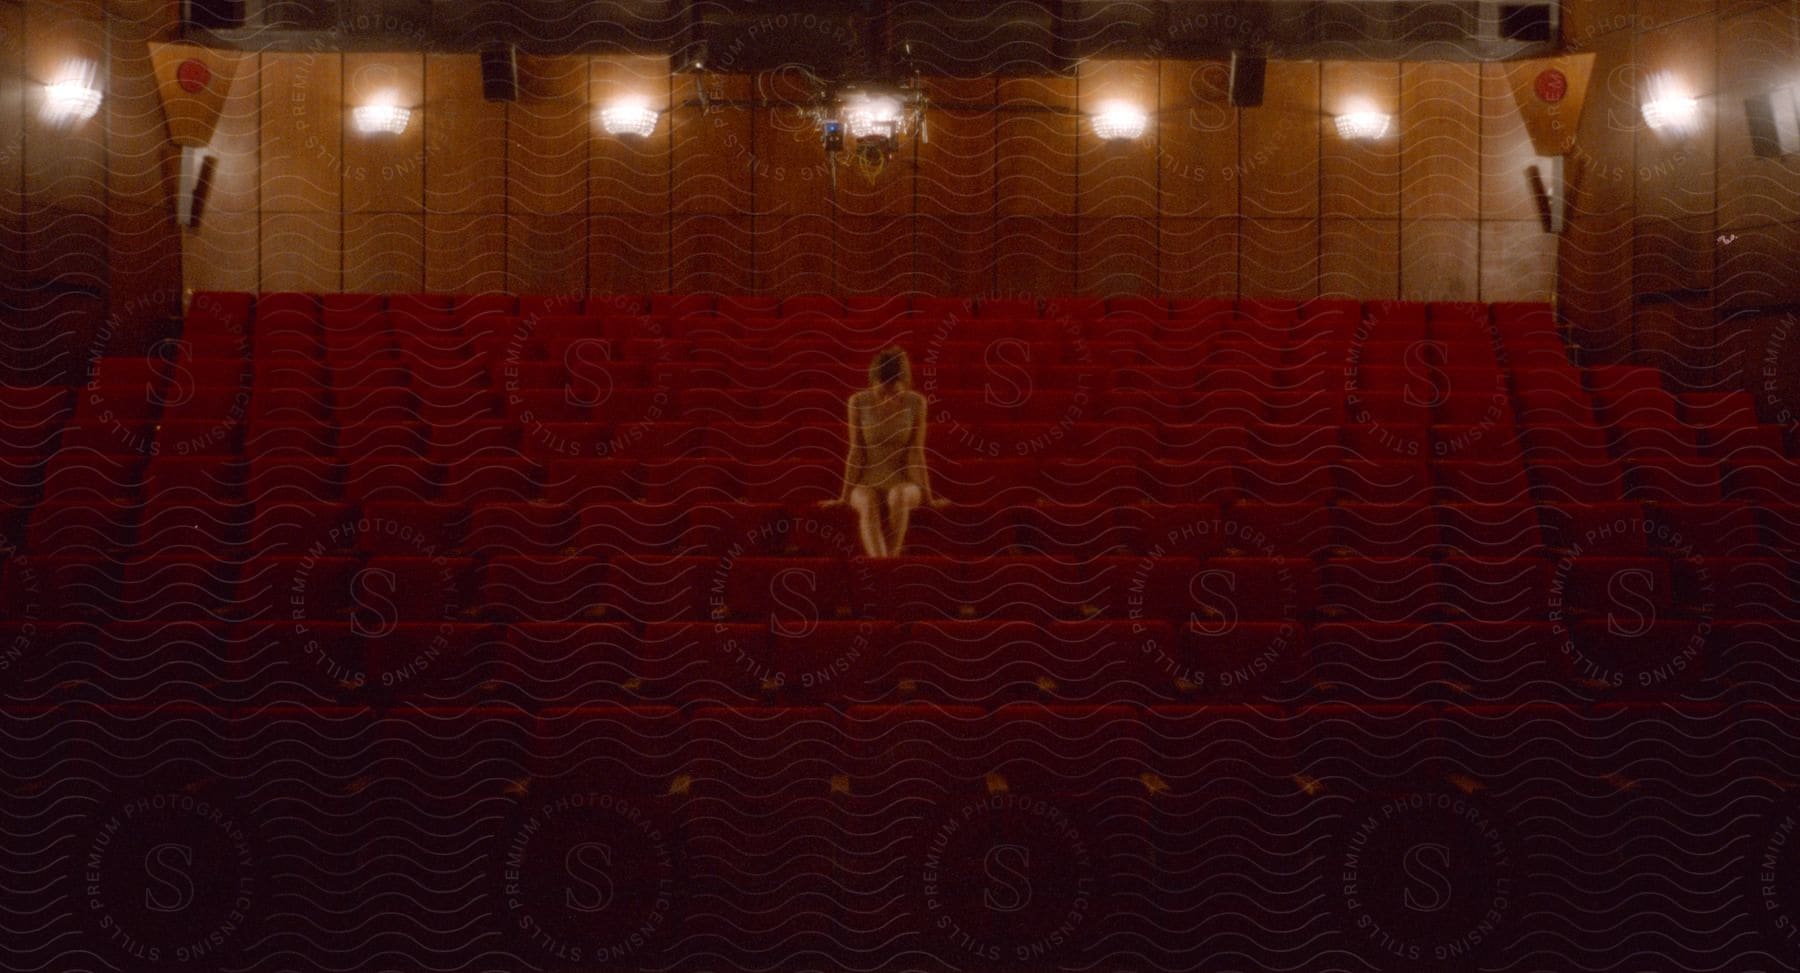 A young woman sitting on a chair in an auditorium